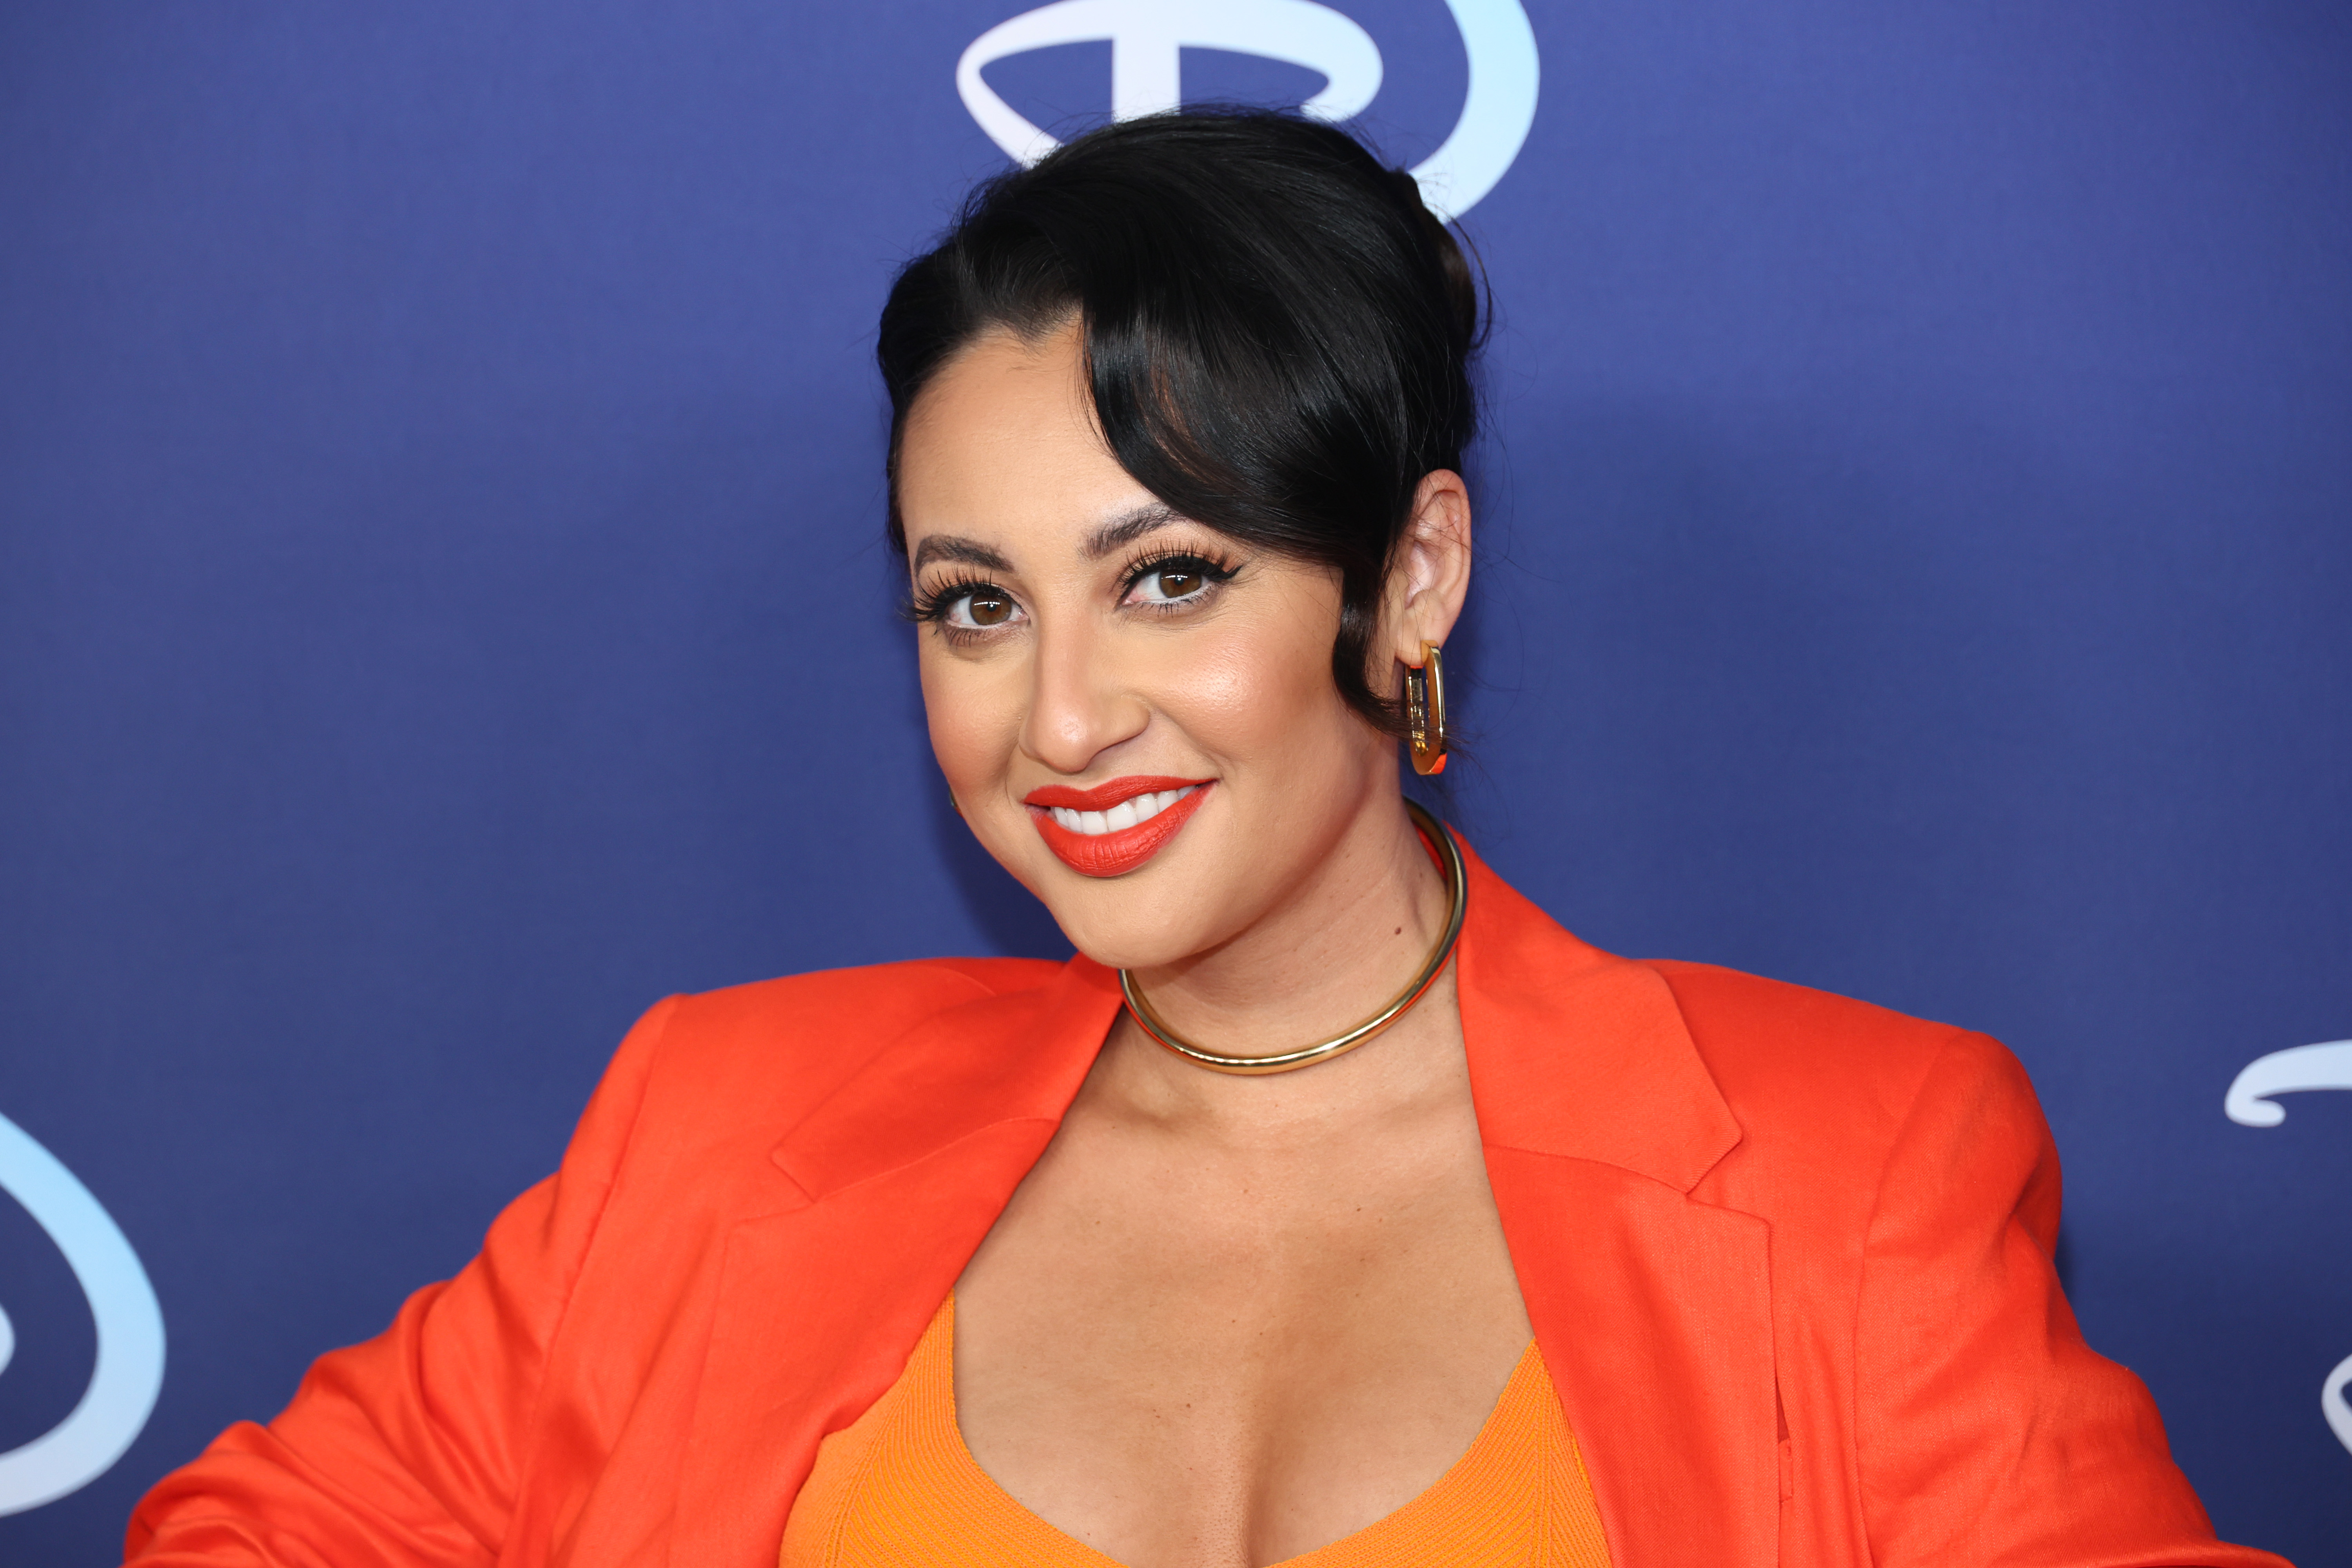 Francia Raisa attends the 2022 ABC Disney Upfront at Basketball City - Pier 36 - South Street on May 17, 2022, in New York City | Source: Getty Images